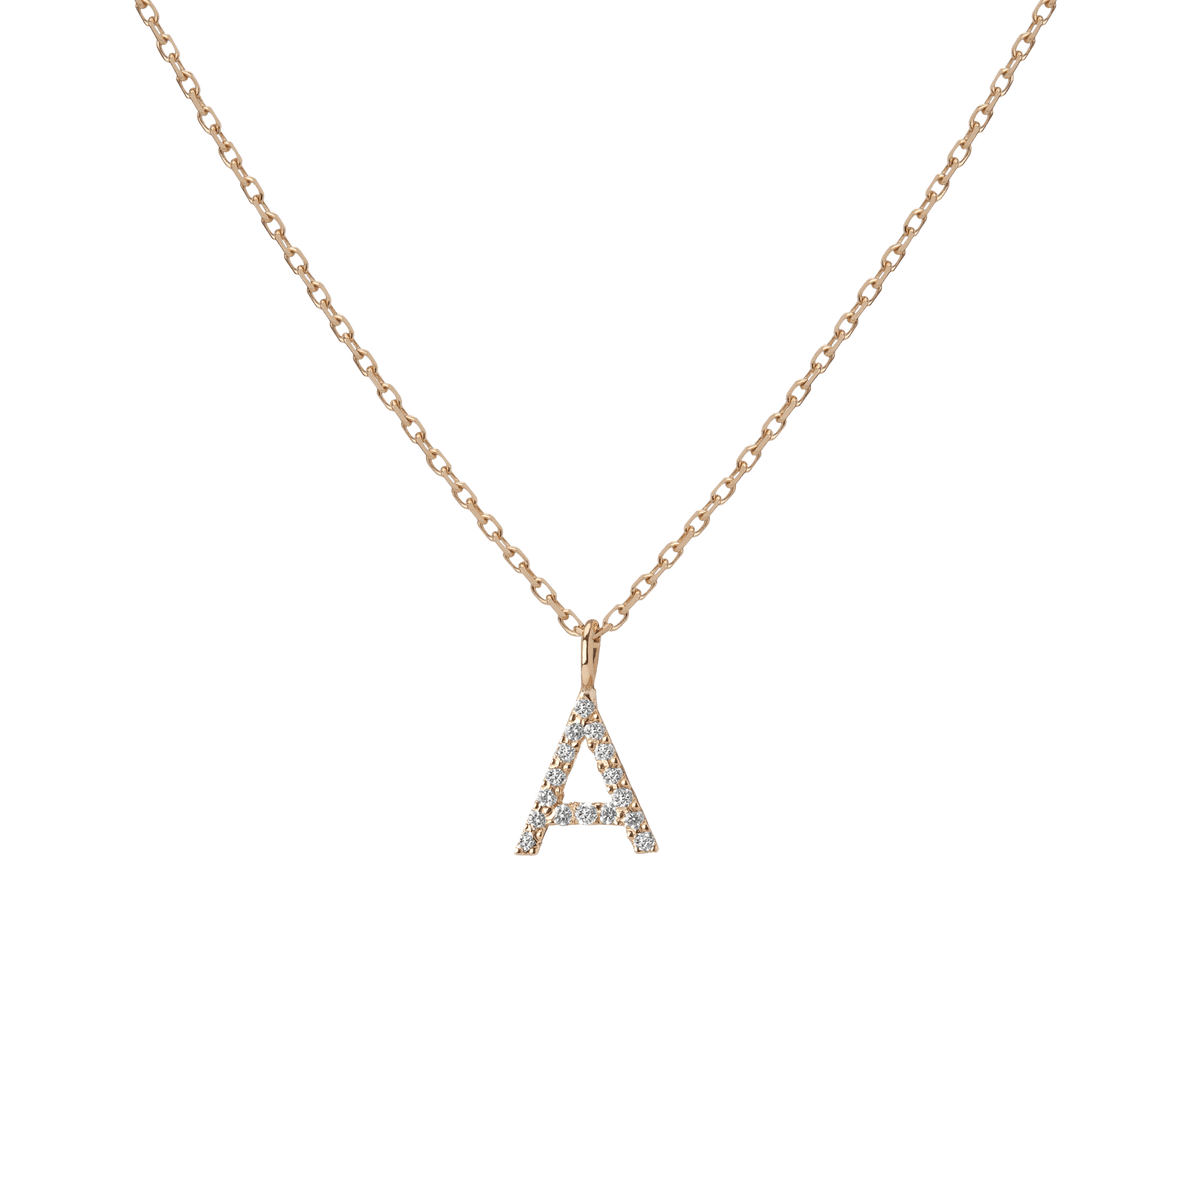 Aurate New York Classic Diamond Letter Necklace, 14K Yellow Gold